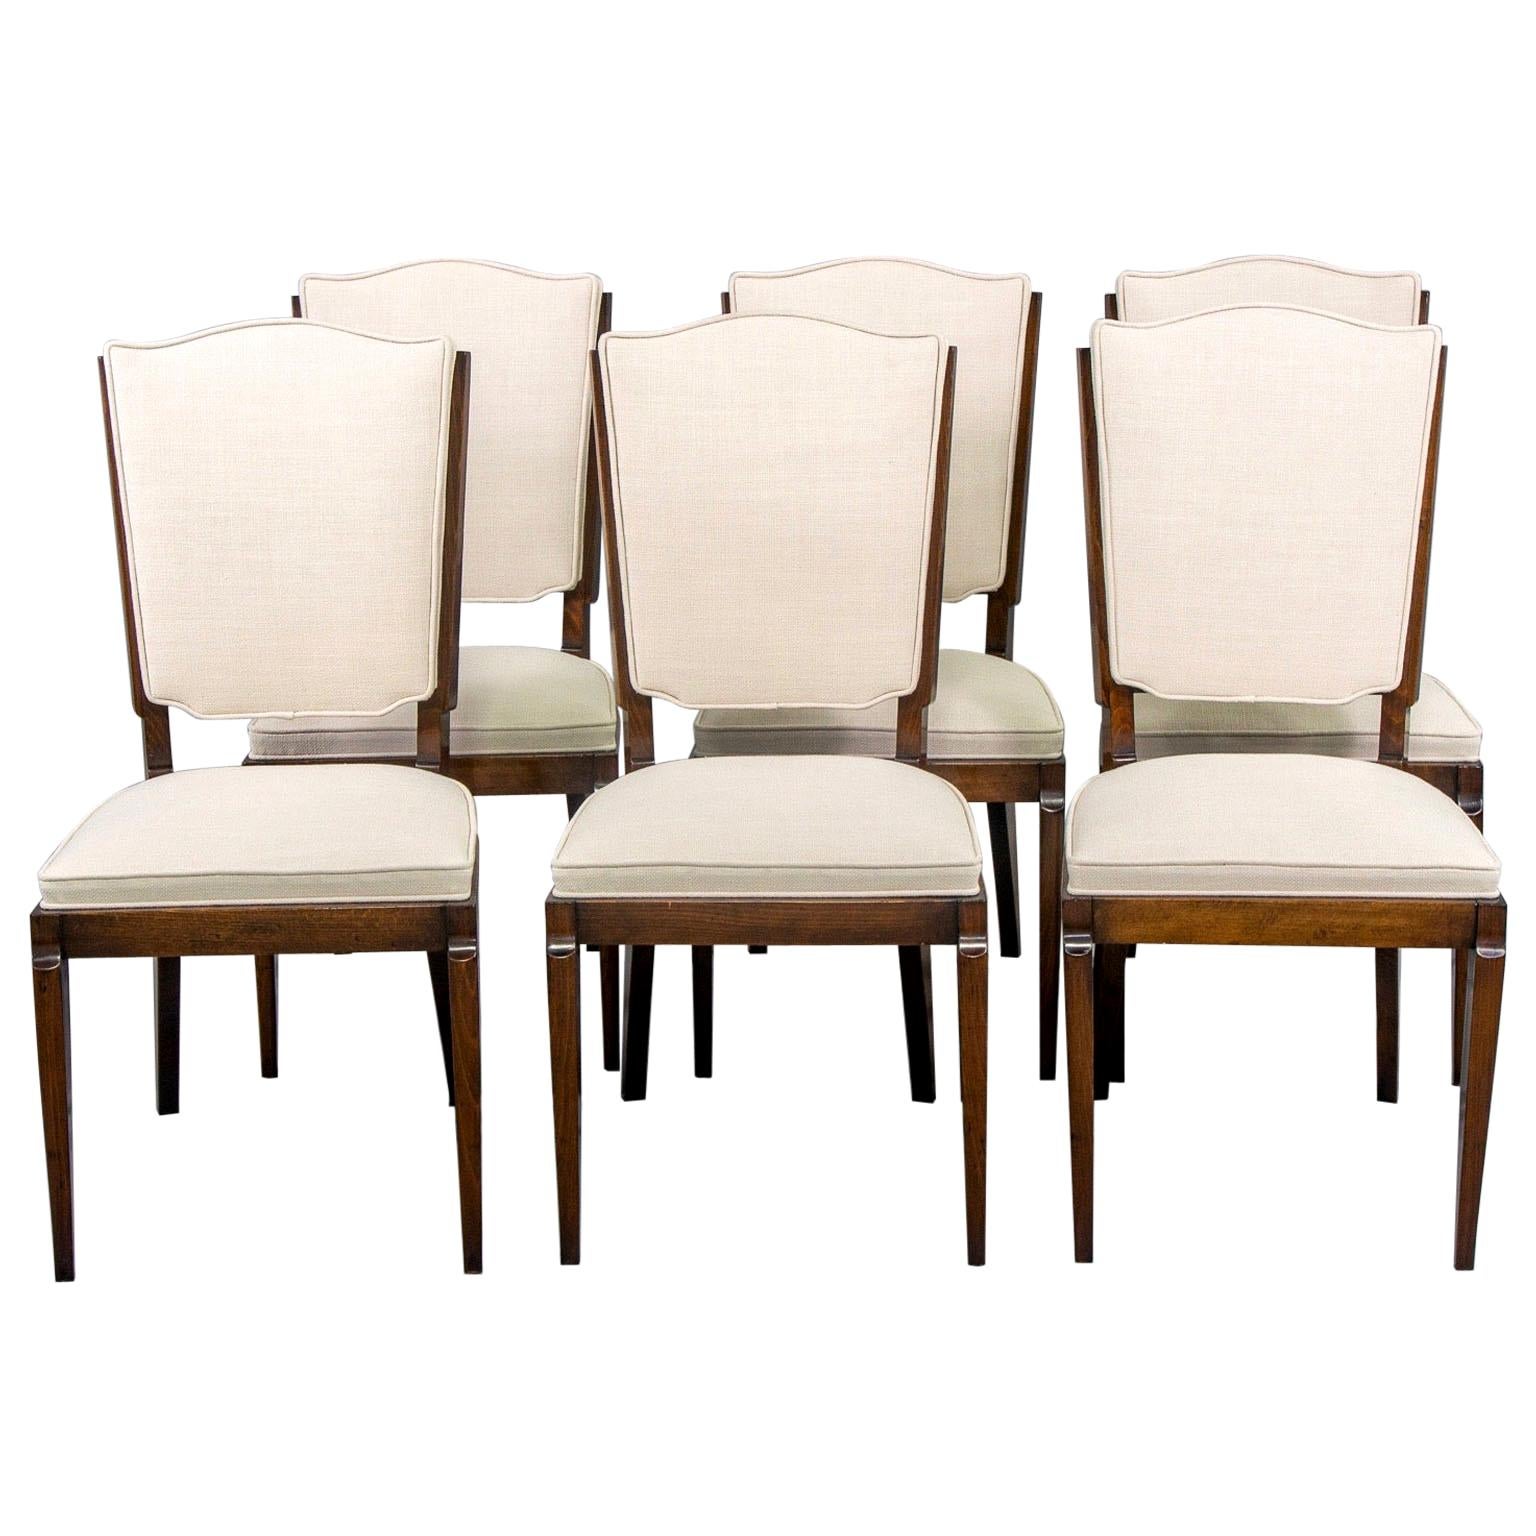 Set of Six Midcentury French Polished Beech Frame Chairs with New Upholstery